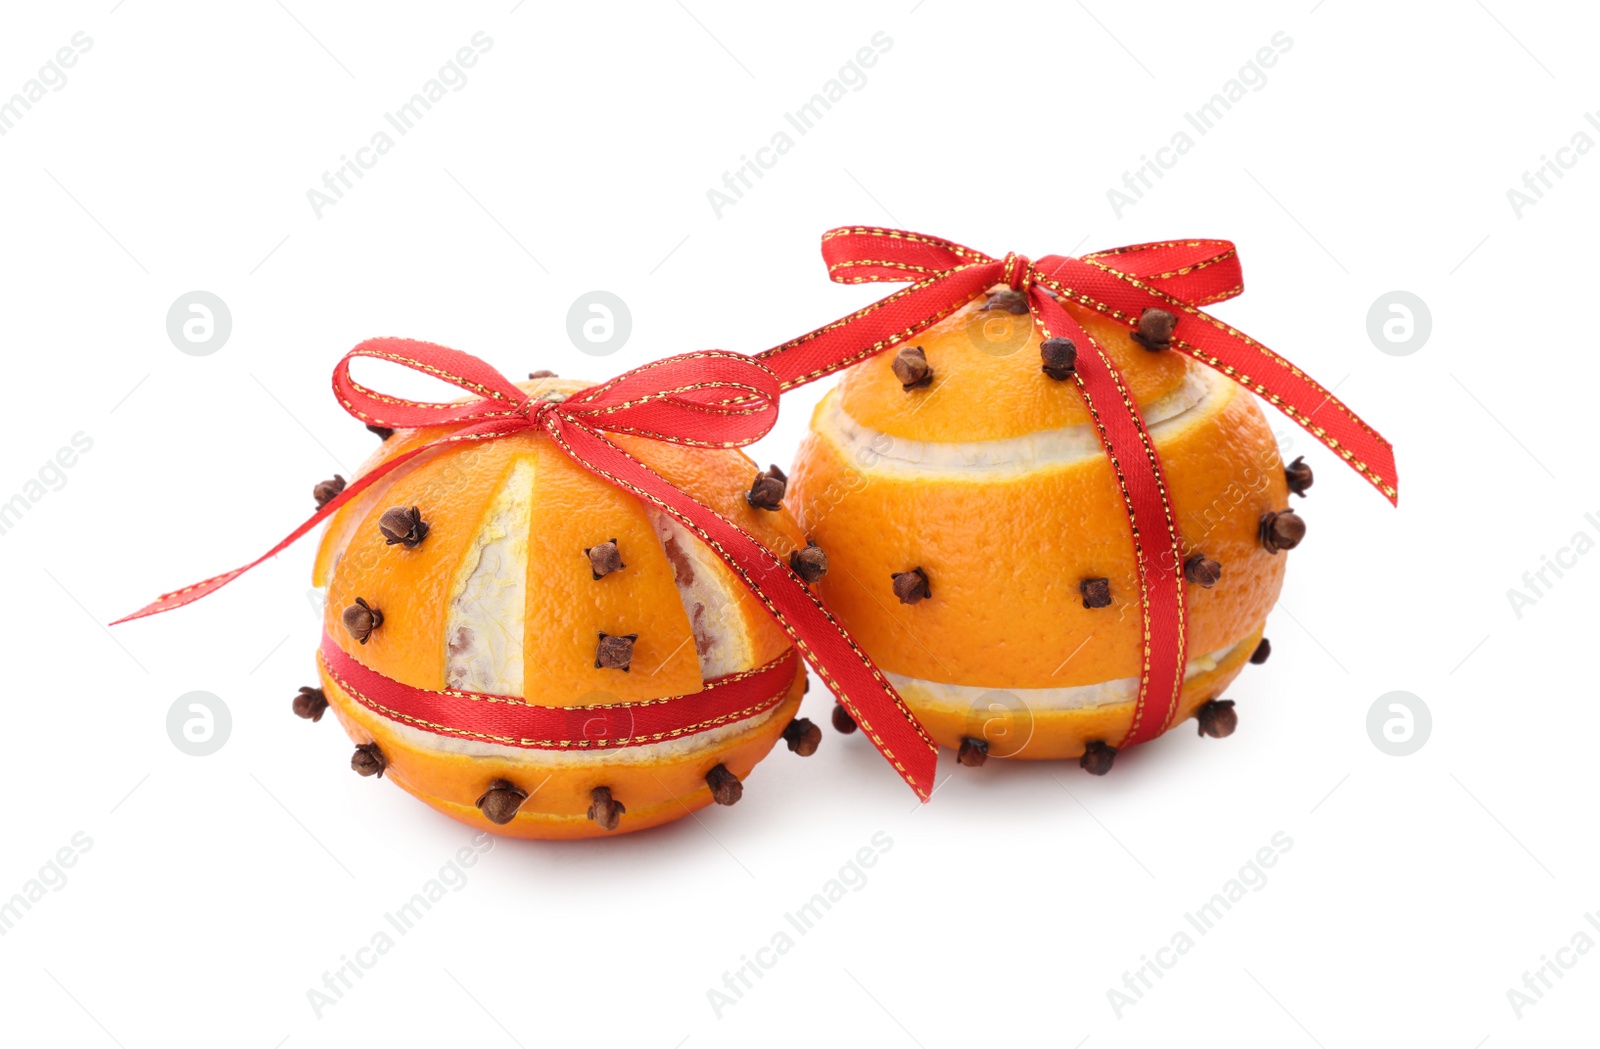 Photo of Pomander balls with red ribbons made of fresh tangerines and cloves on white background